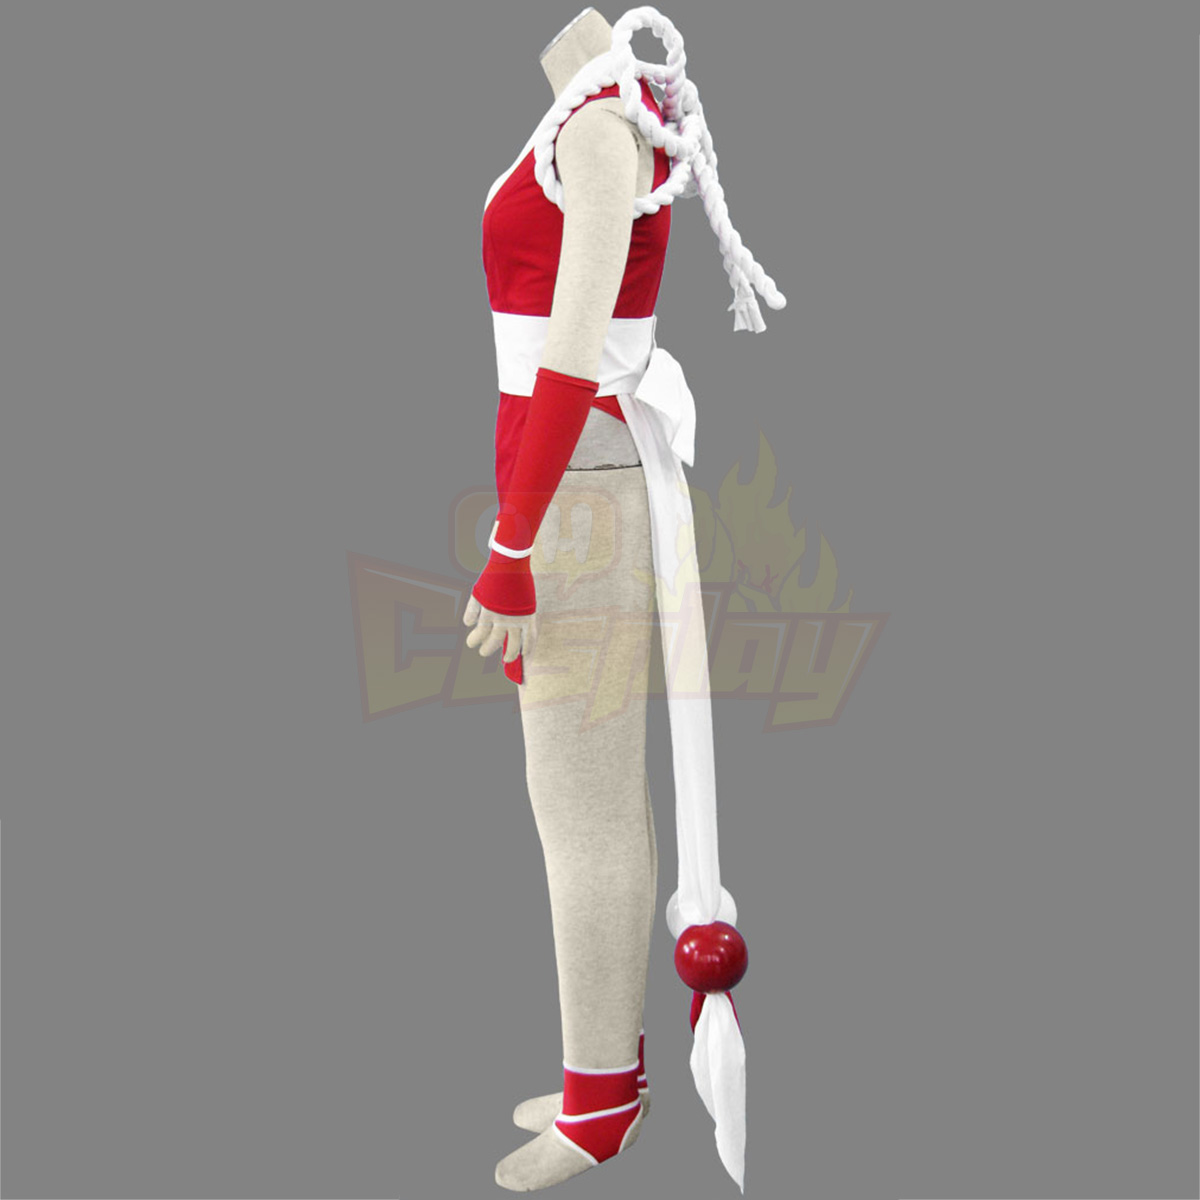 The King Of Fighters Mai Shiranui 1ST Cosplay Costumes Deluxe Edition